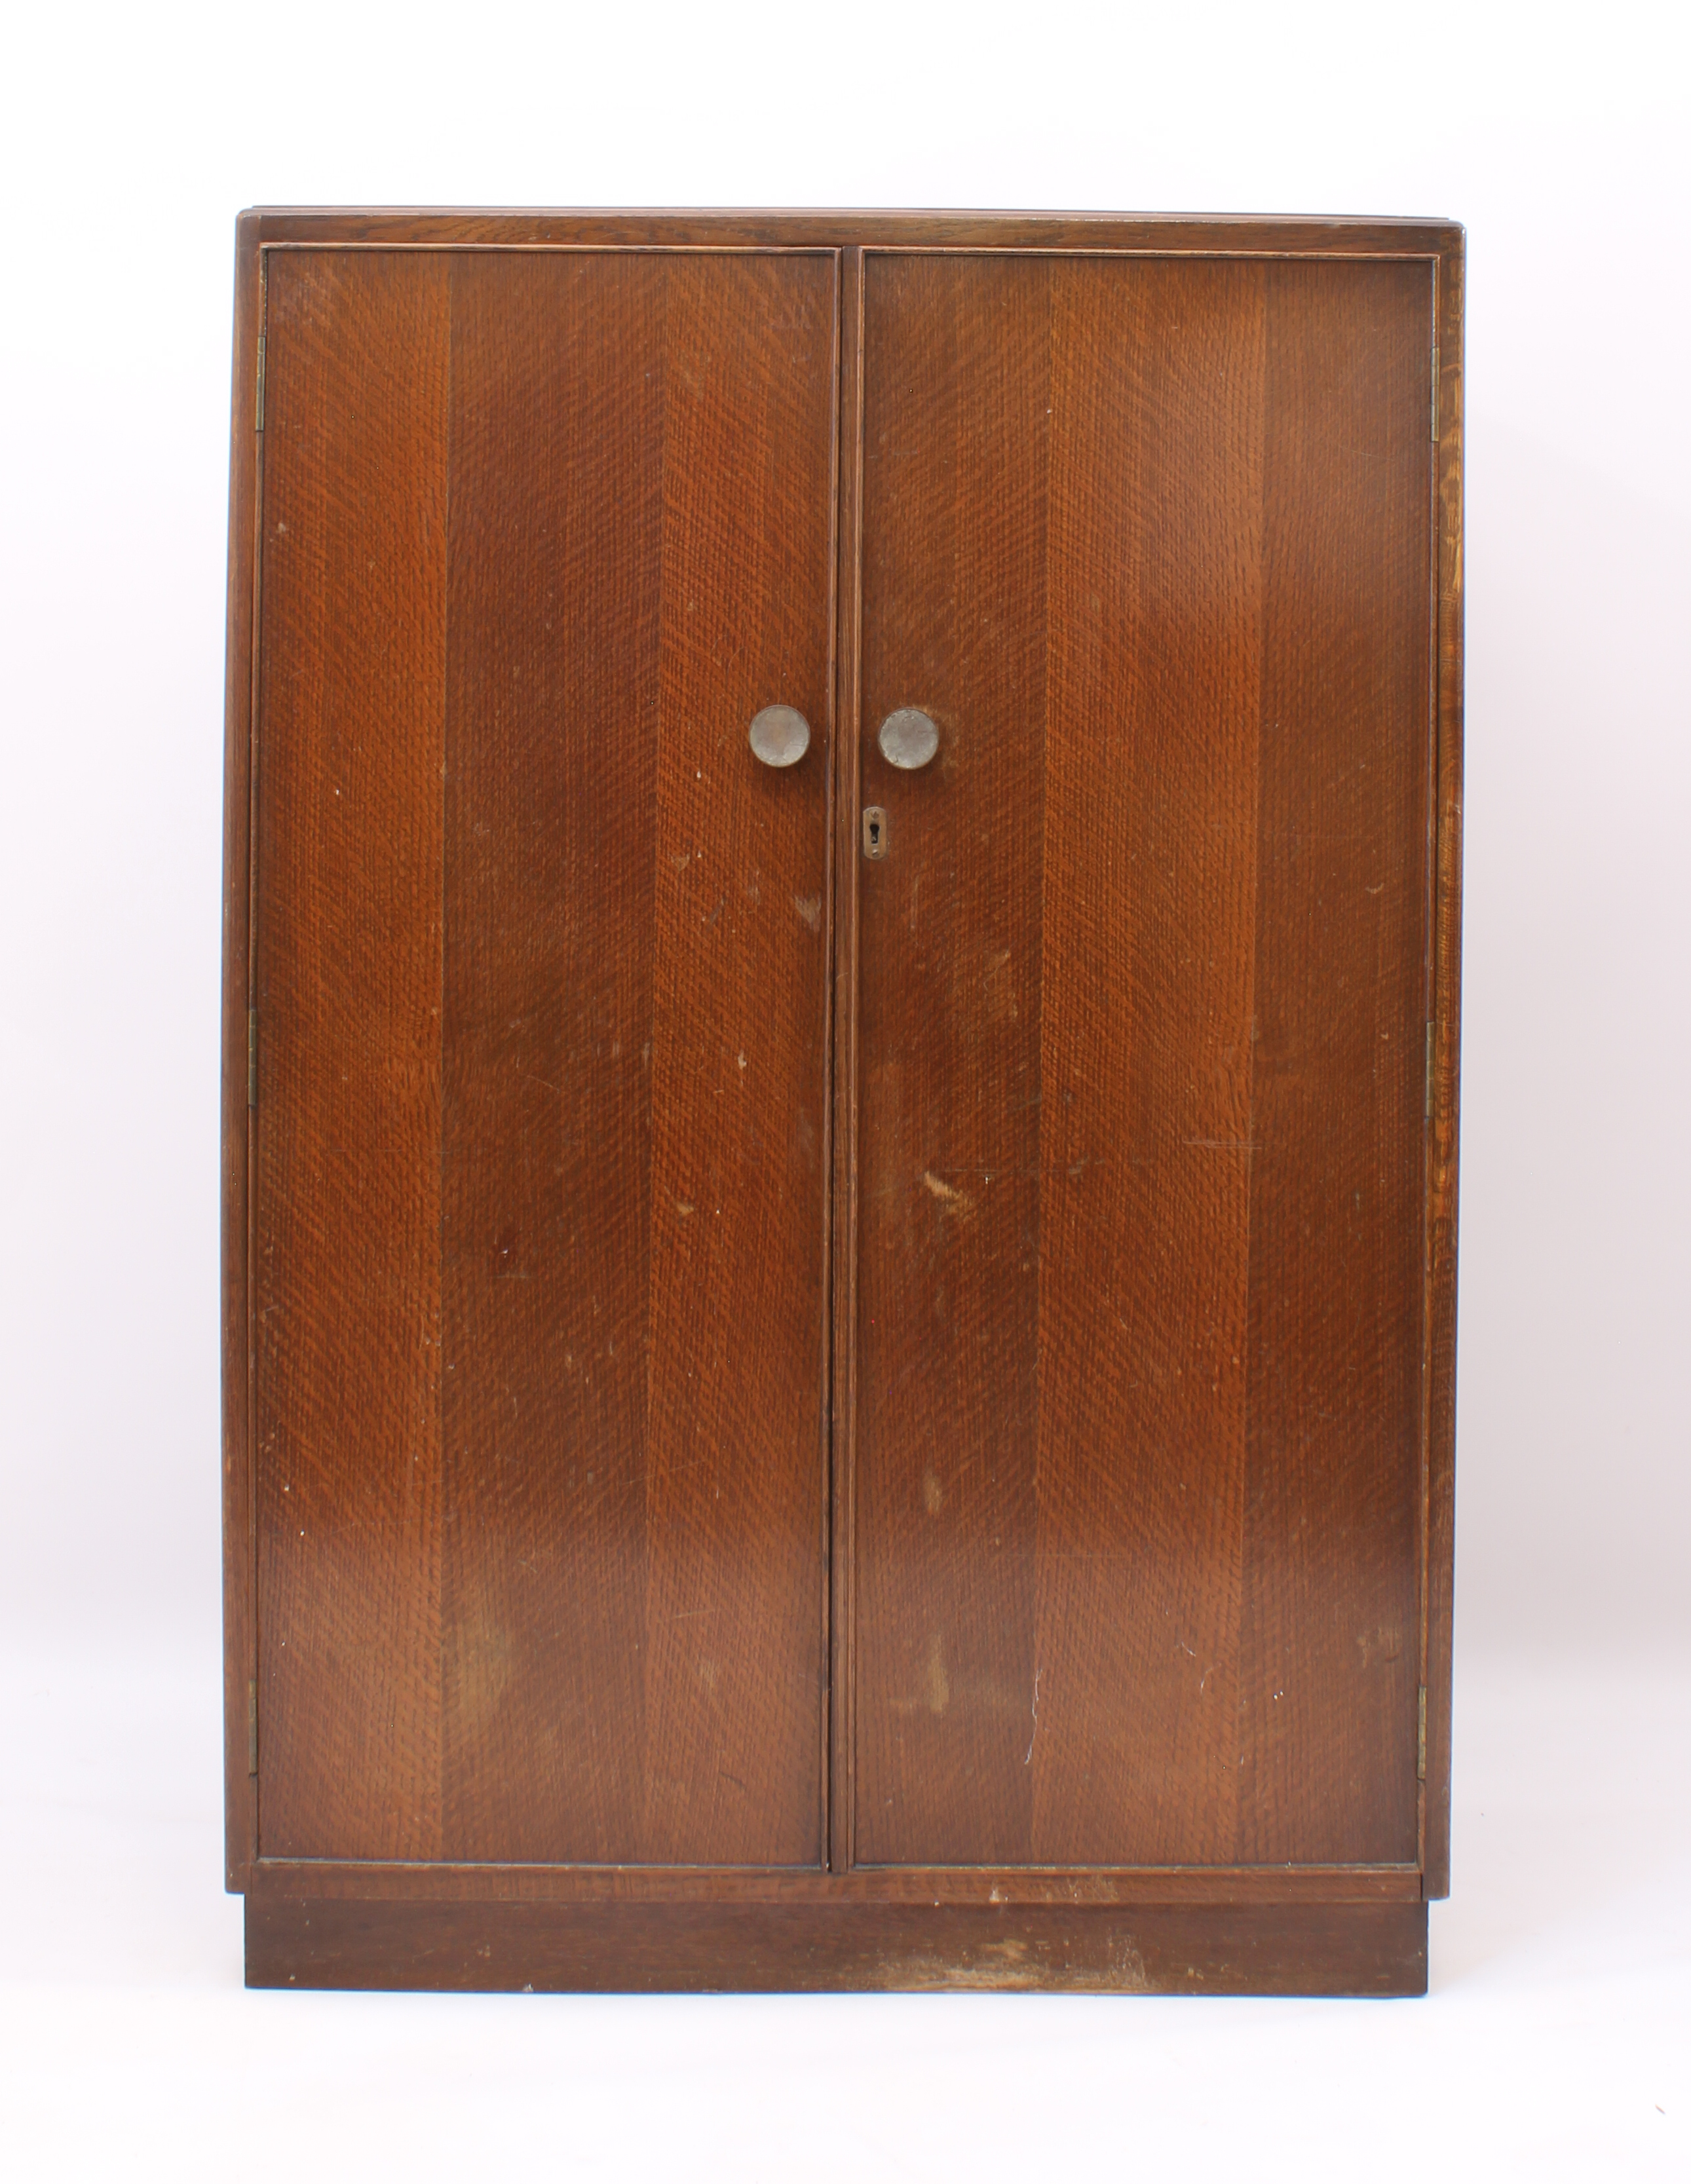 A 1940s-50s oak child's compactum wardrobe - striped veneered doors and inset plinth base, the